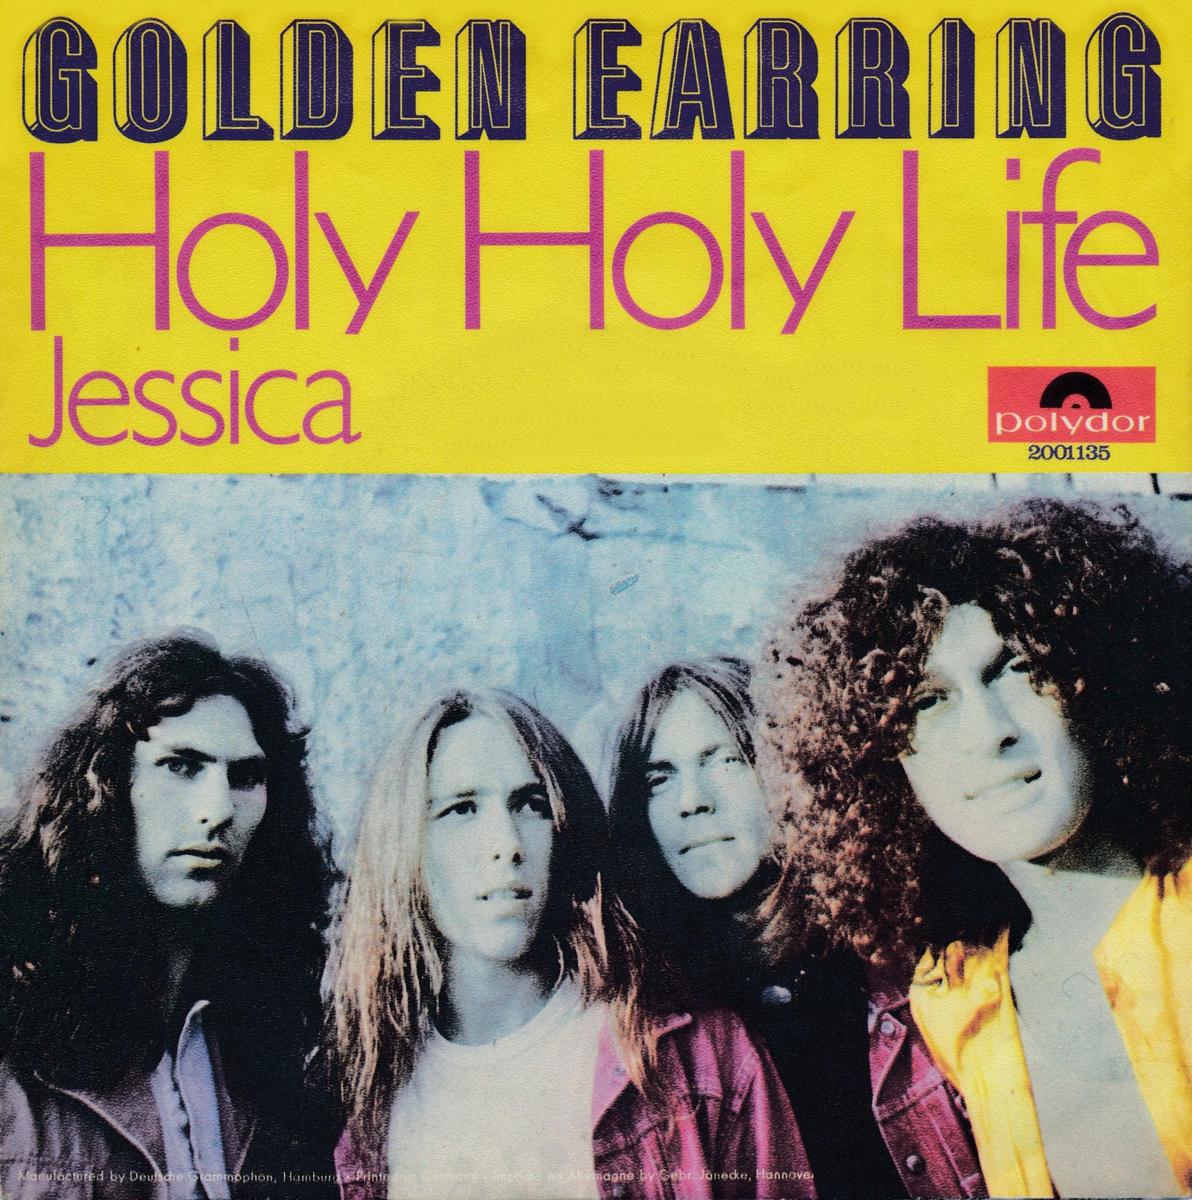 Golden Earring - Holy Holy Life - D-Poly